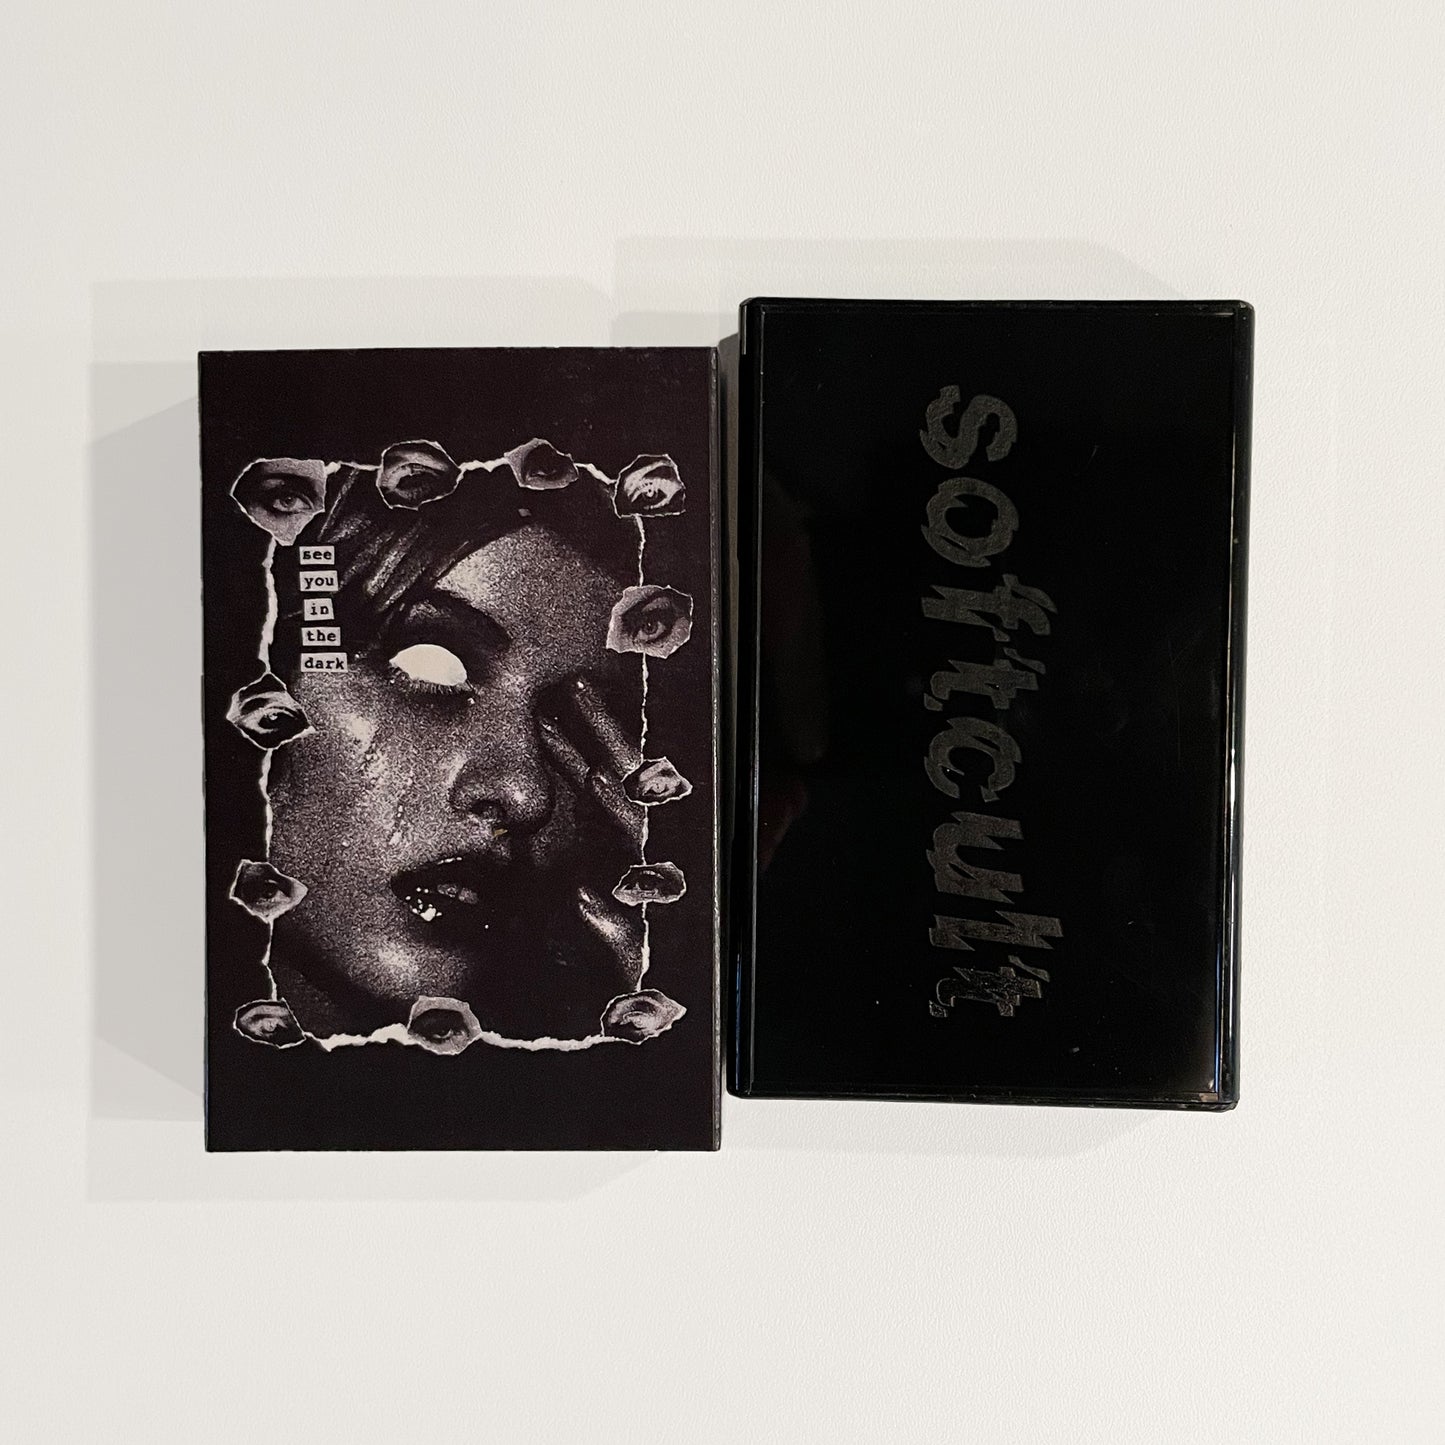 See You In The Dark [deluxe limited edition cassette] LOW STOCK!